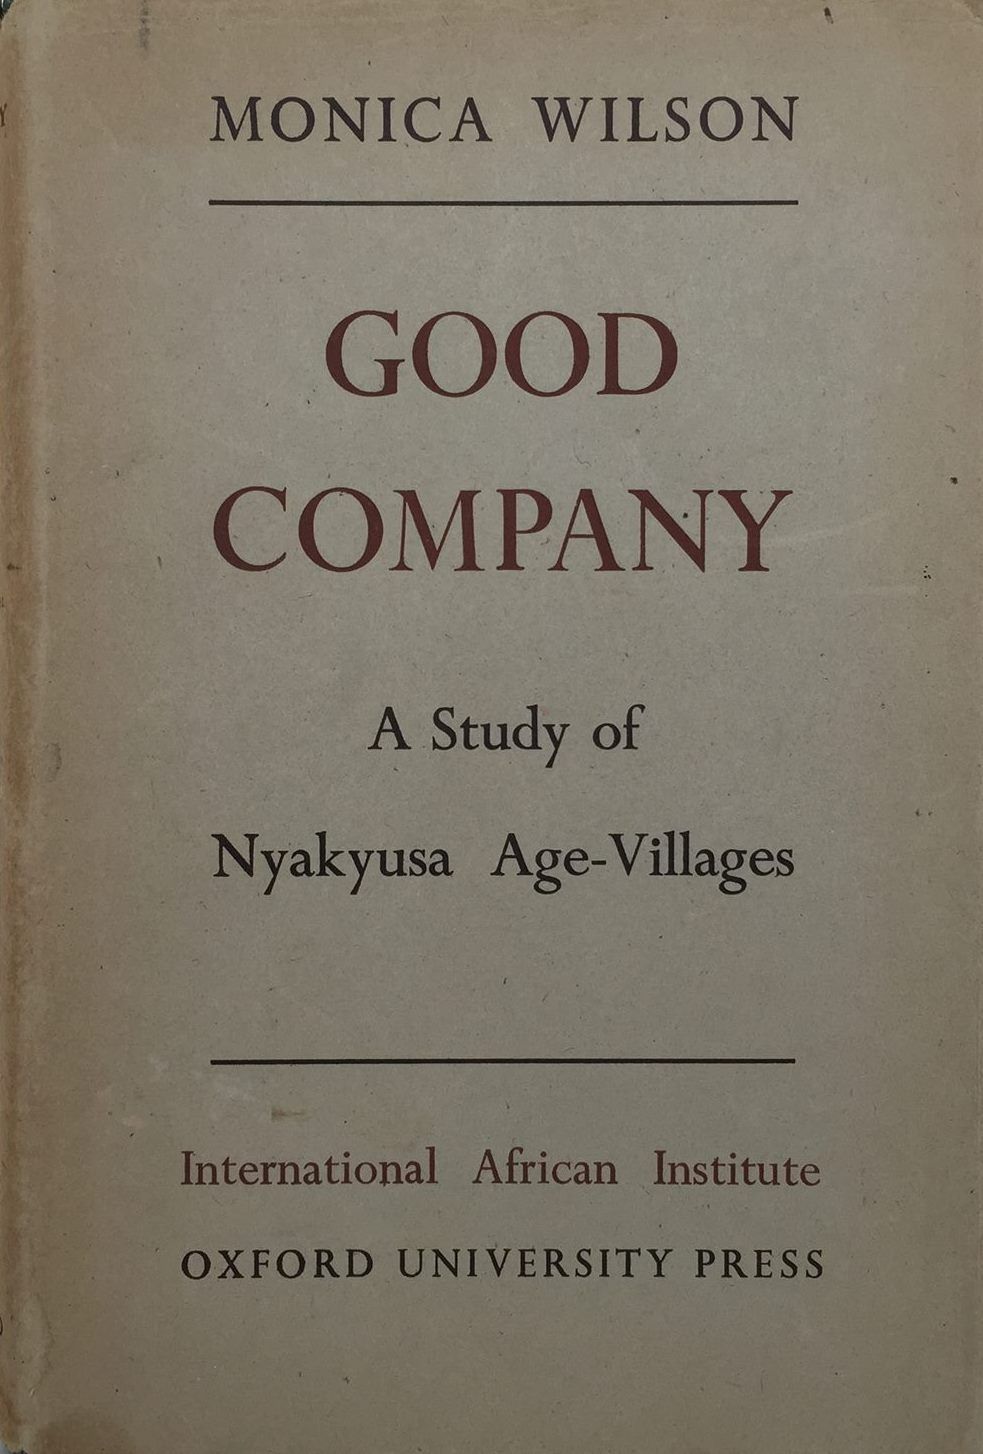 GOOD COMPANY: A Study of Nyakyusa Age Villages